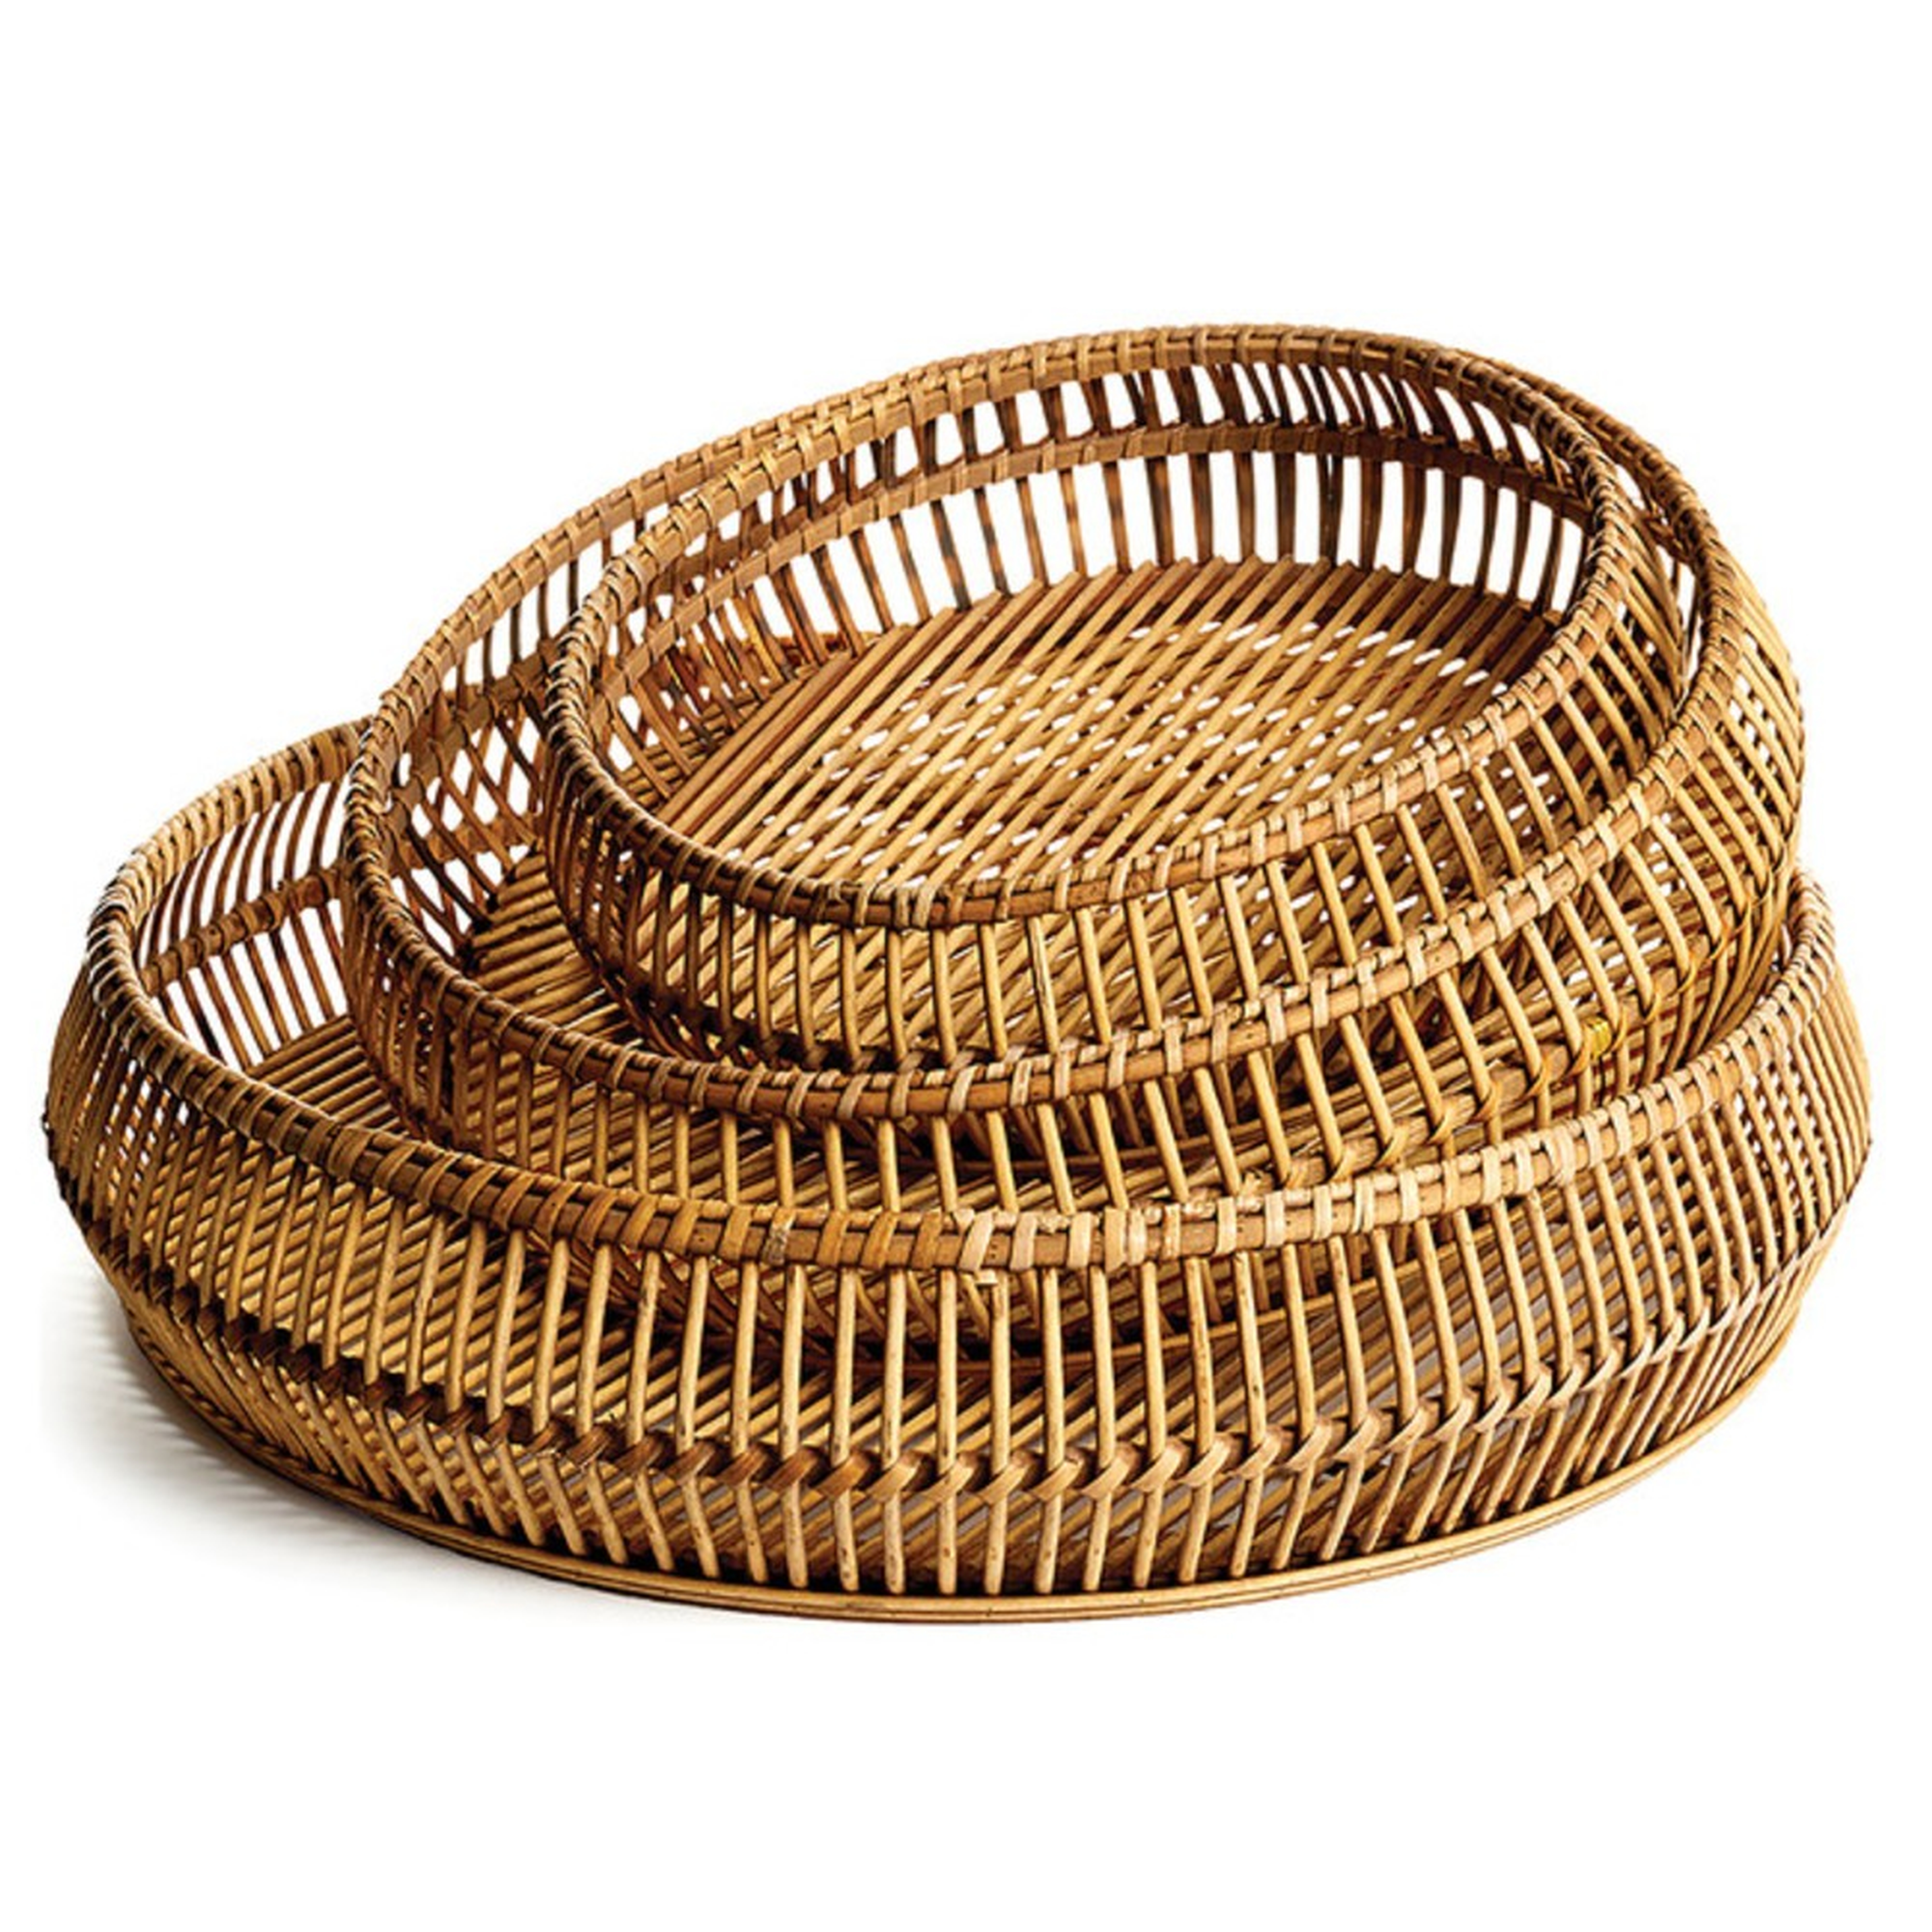 Riley Rustic Lodge Wooden Round River Baskets - Set of 3 - Kathy Kuo Home